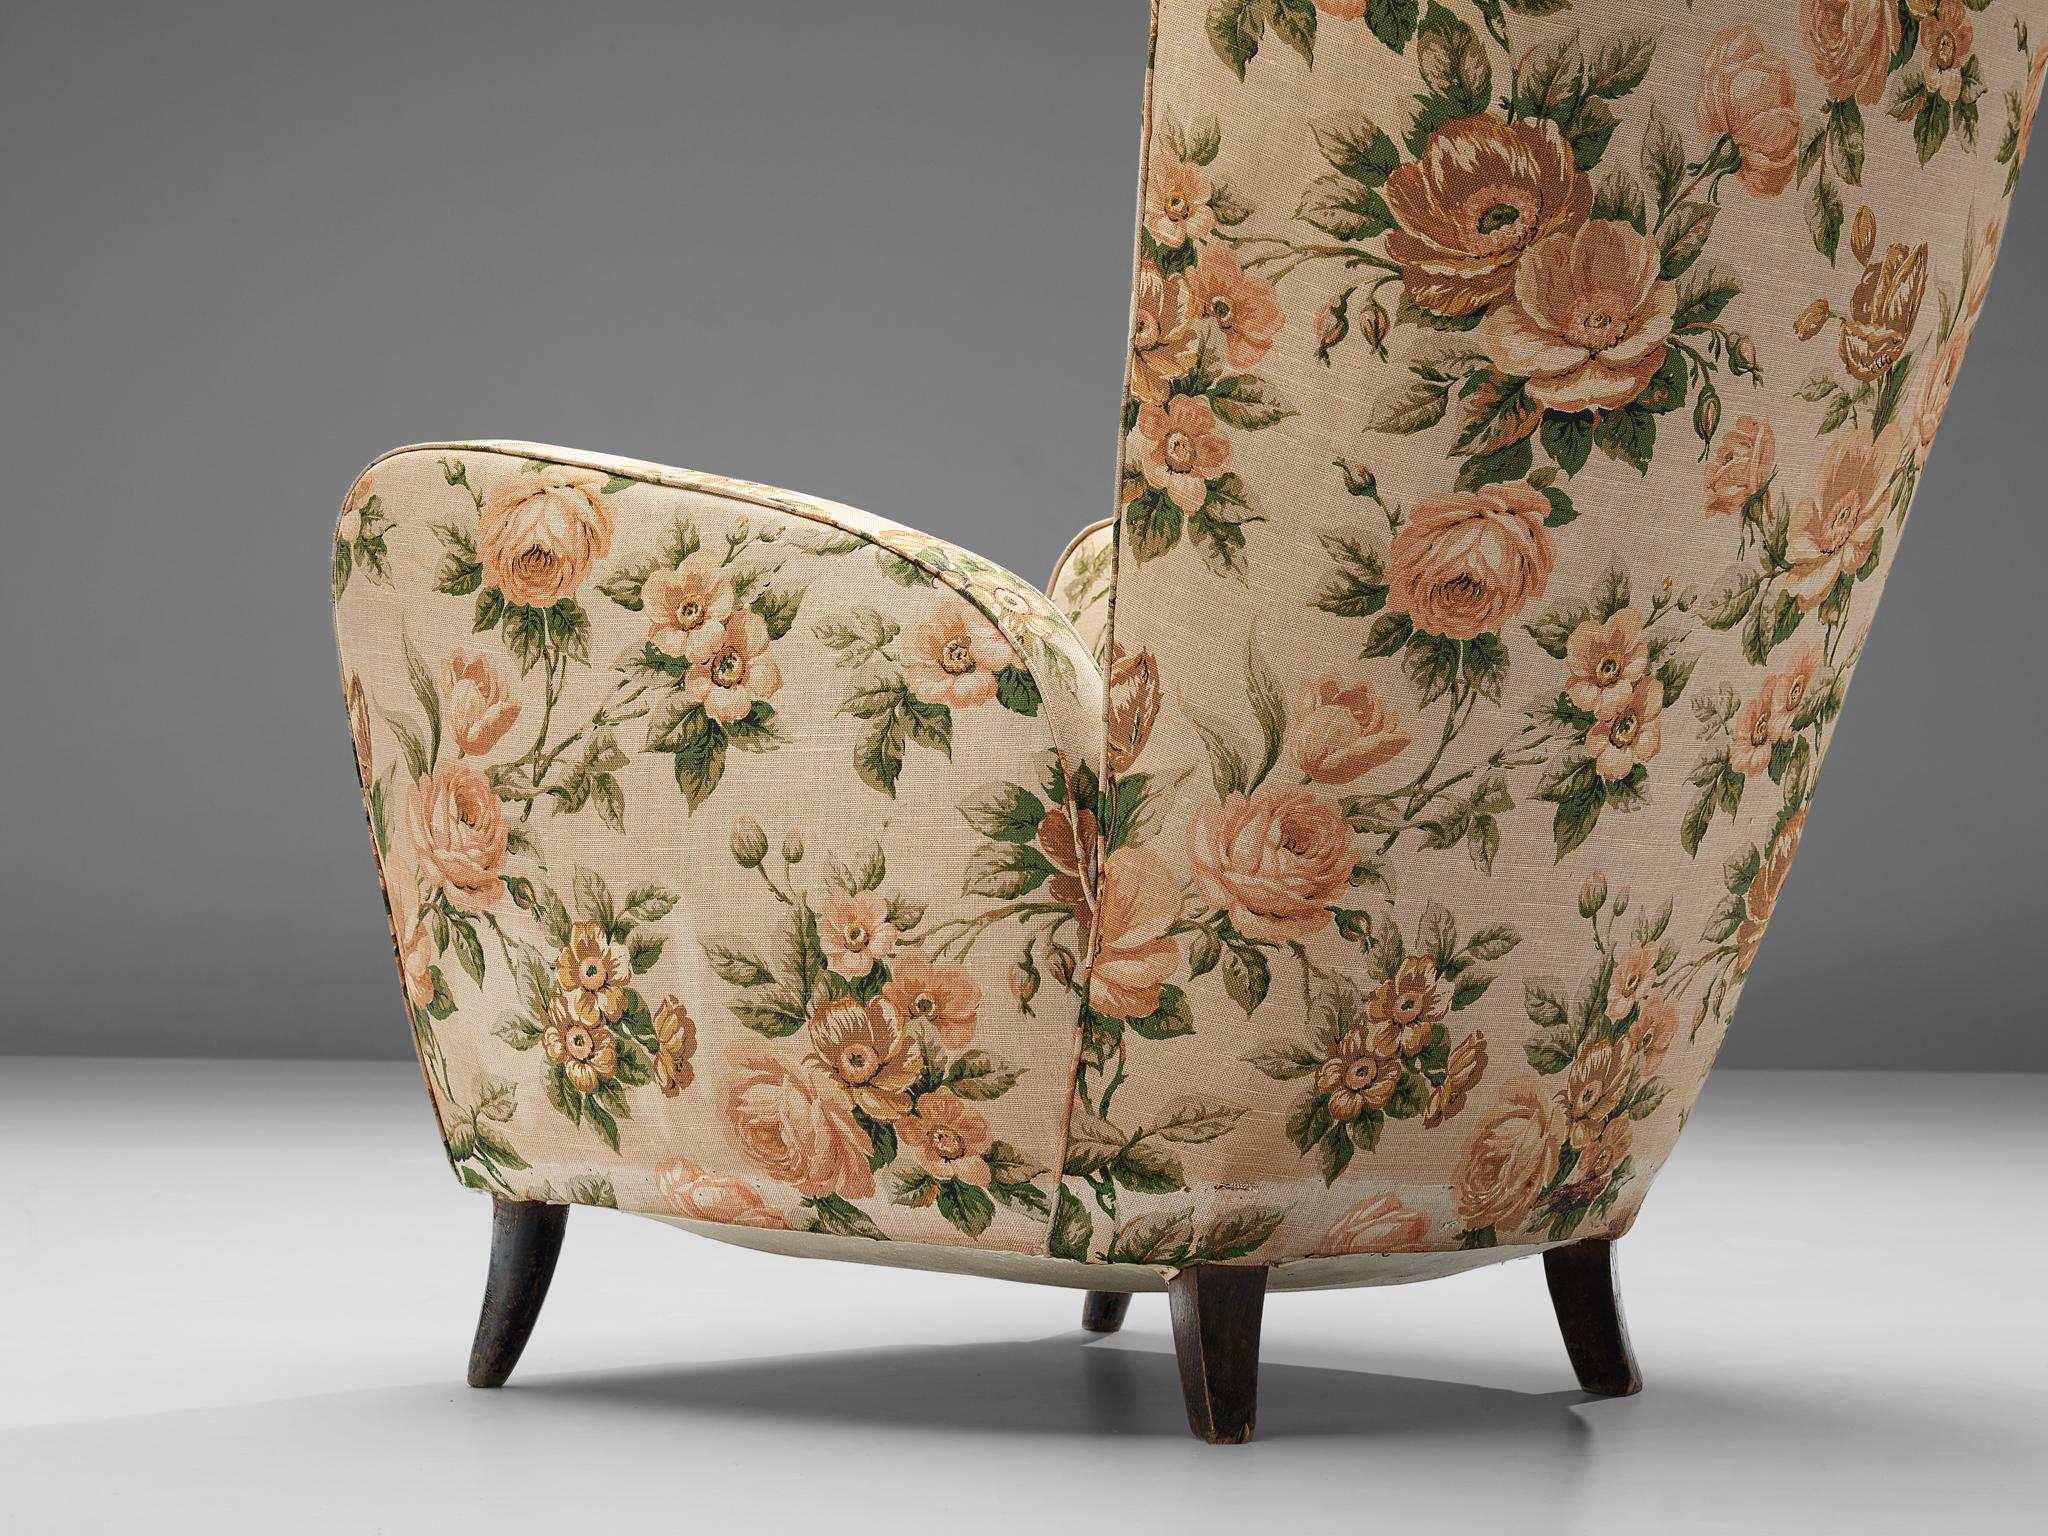 Pair of Italian Wingback Chairs in Floral Upholstery 1